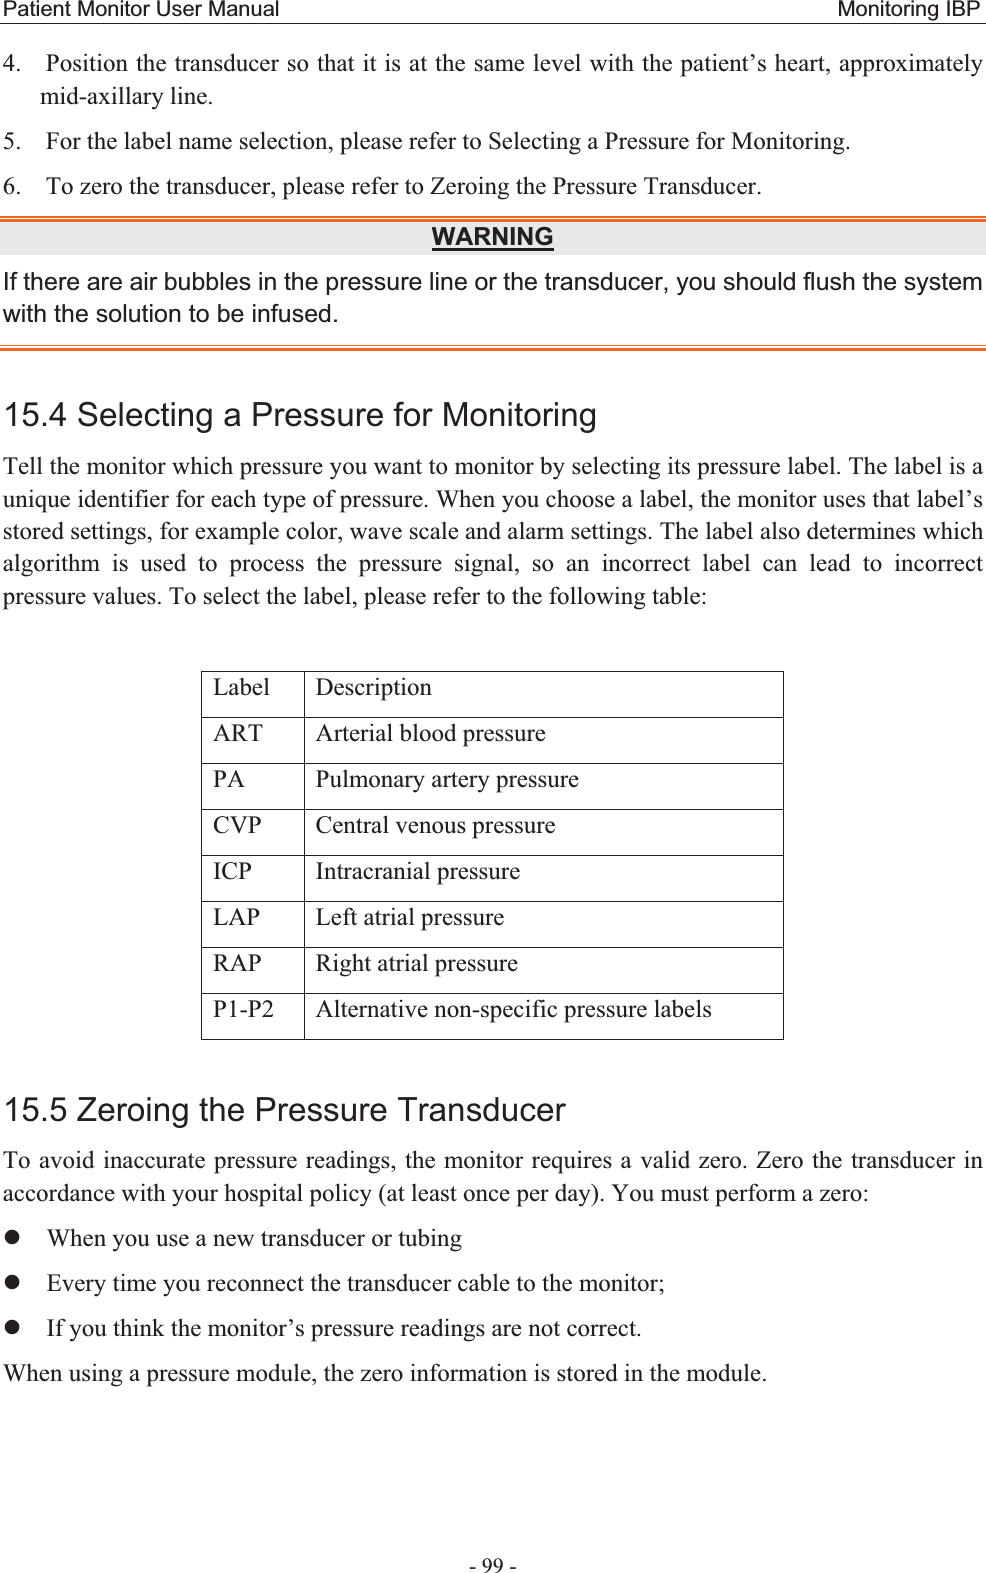 Patient Monitor User Manual                                                   Monitoring IBP  - 99 - 4. Position the transducer so that it is at the same level with the patient’s heart, approximately mid-axillary line. 5. For the label name selection, please refer to Selecting a Pressure for Monitoring. 6. To zero the transducer, please refer to Zeroing the Pressure Transducer. WARNINGIf there are air bubbles in the pressure line or the transducer, you should flush the system with the solution to be infused. 15.4 Selecting a Pressure for Monitoring Tell the monitor which pressure you want to monitor by selecting its pressure label. The label is a unique identifier for each type of pressure. When you choose a label, the monitor uses that label’s stored settings, for example color, wave scale and alarm settings. The label also determines which algorithm is used to process the pressure signal, so an incorrect label can lead to incorrect pressure values. To select the label, please refer to the following table:  Label Description ART  Arterial blood pressure   PA  Pulmonary artery pressure CVP  Central venous pressure ICP Intracranial pressure LAP  Left atrial pressure RAP Right atrial pressure P1-P2  Alternative non-specific pressure labels 15.5 Zeroing the Pressure TransducerTo avoid inaccurate pressure readings, the monitor requires a valid zero. Zero the transducer in accordance with your hospital policy (at least once per day). You must perform a zero: zWhen you use a new transducer or tubing zEvery time you reconnect the transducer cable to the monitor; zIf you think the monitor’s pressure readings are not correct.   When using a pressure module, the zero information is stored in the module.   